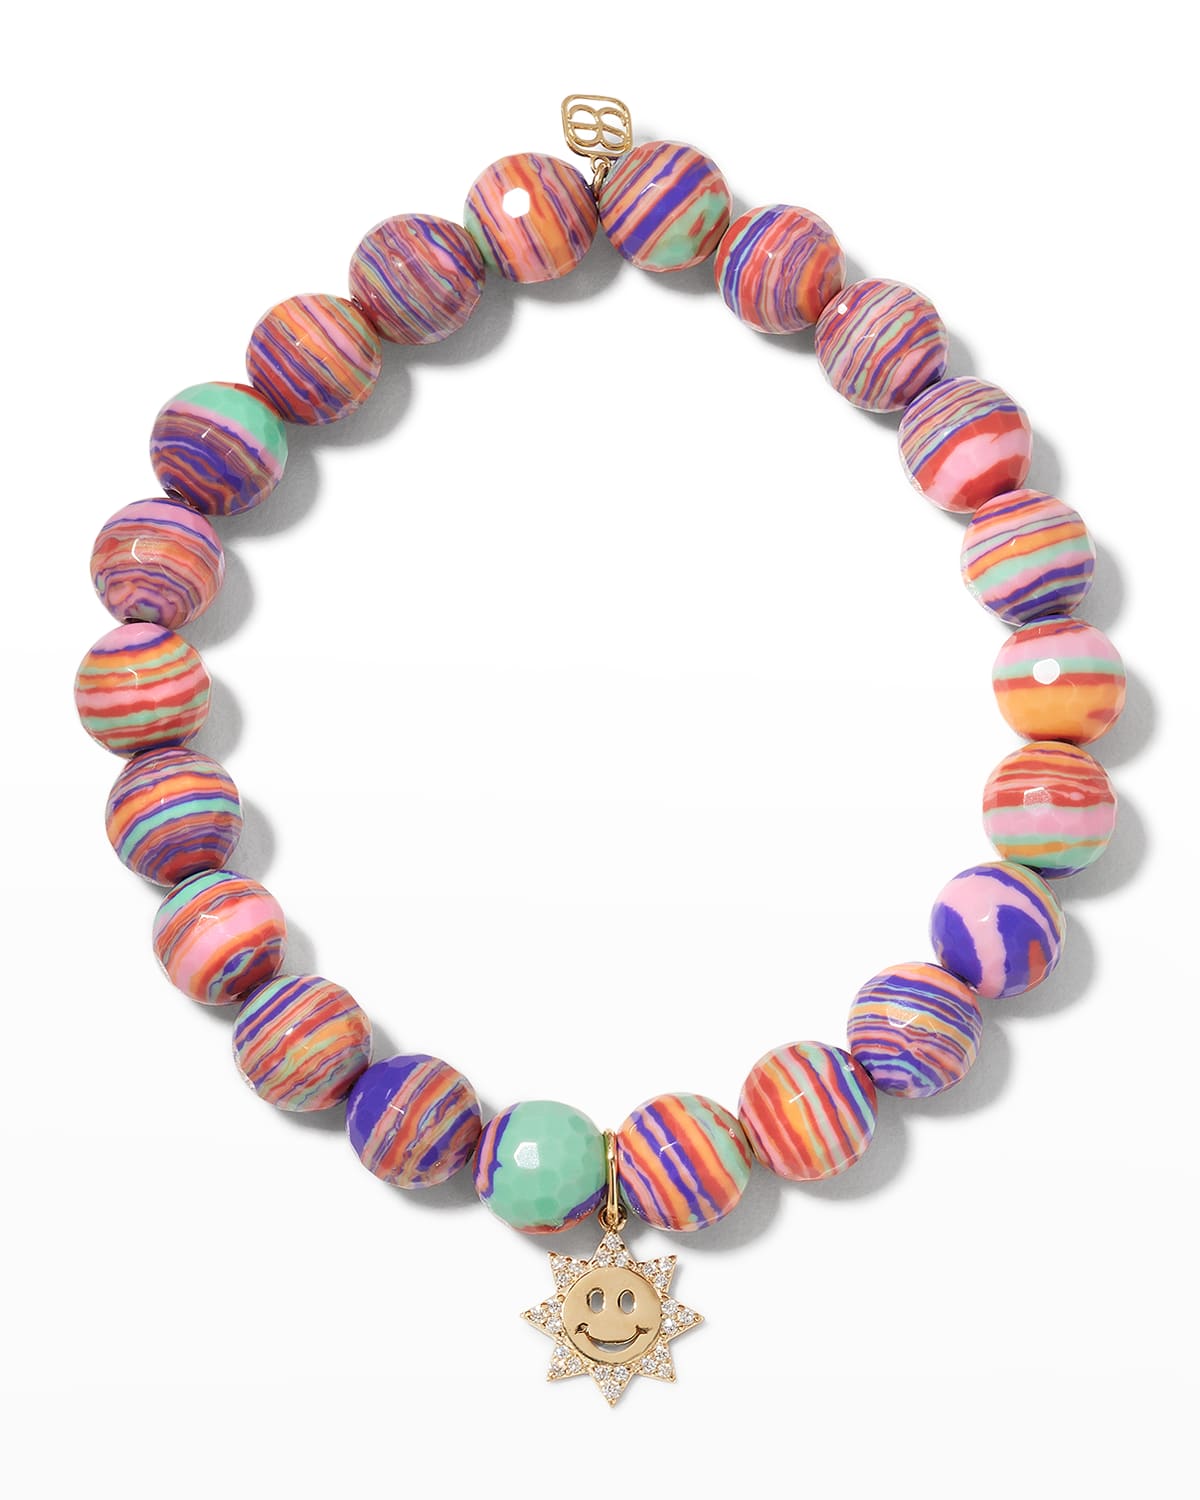 Pink Striped Jasper Bracelet with Small Happy Face Sun Charm